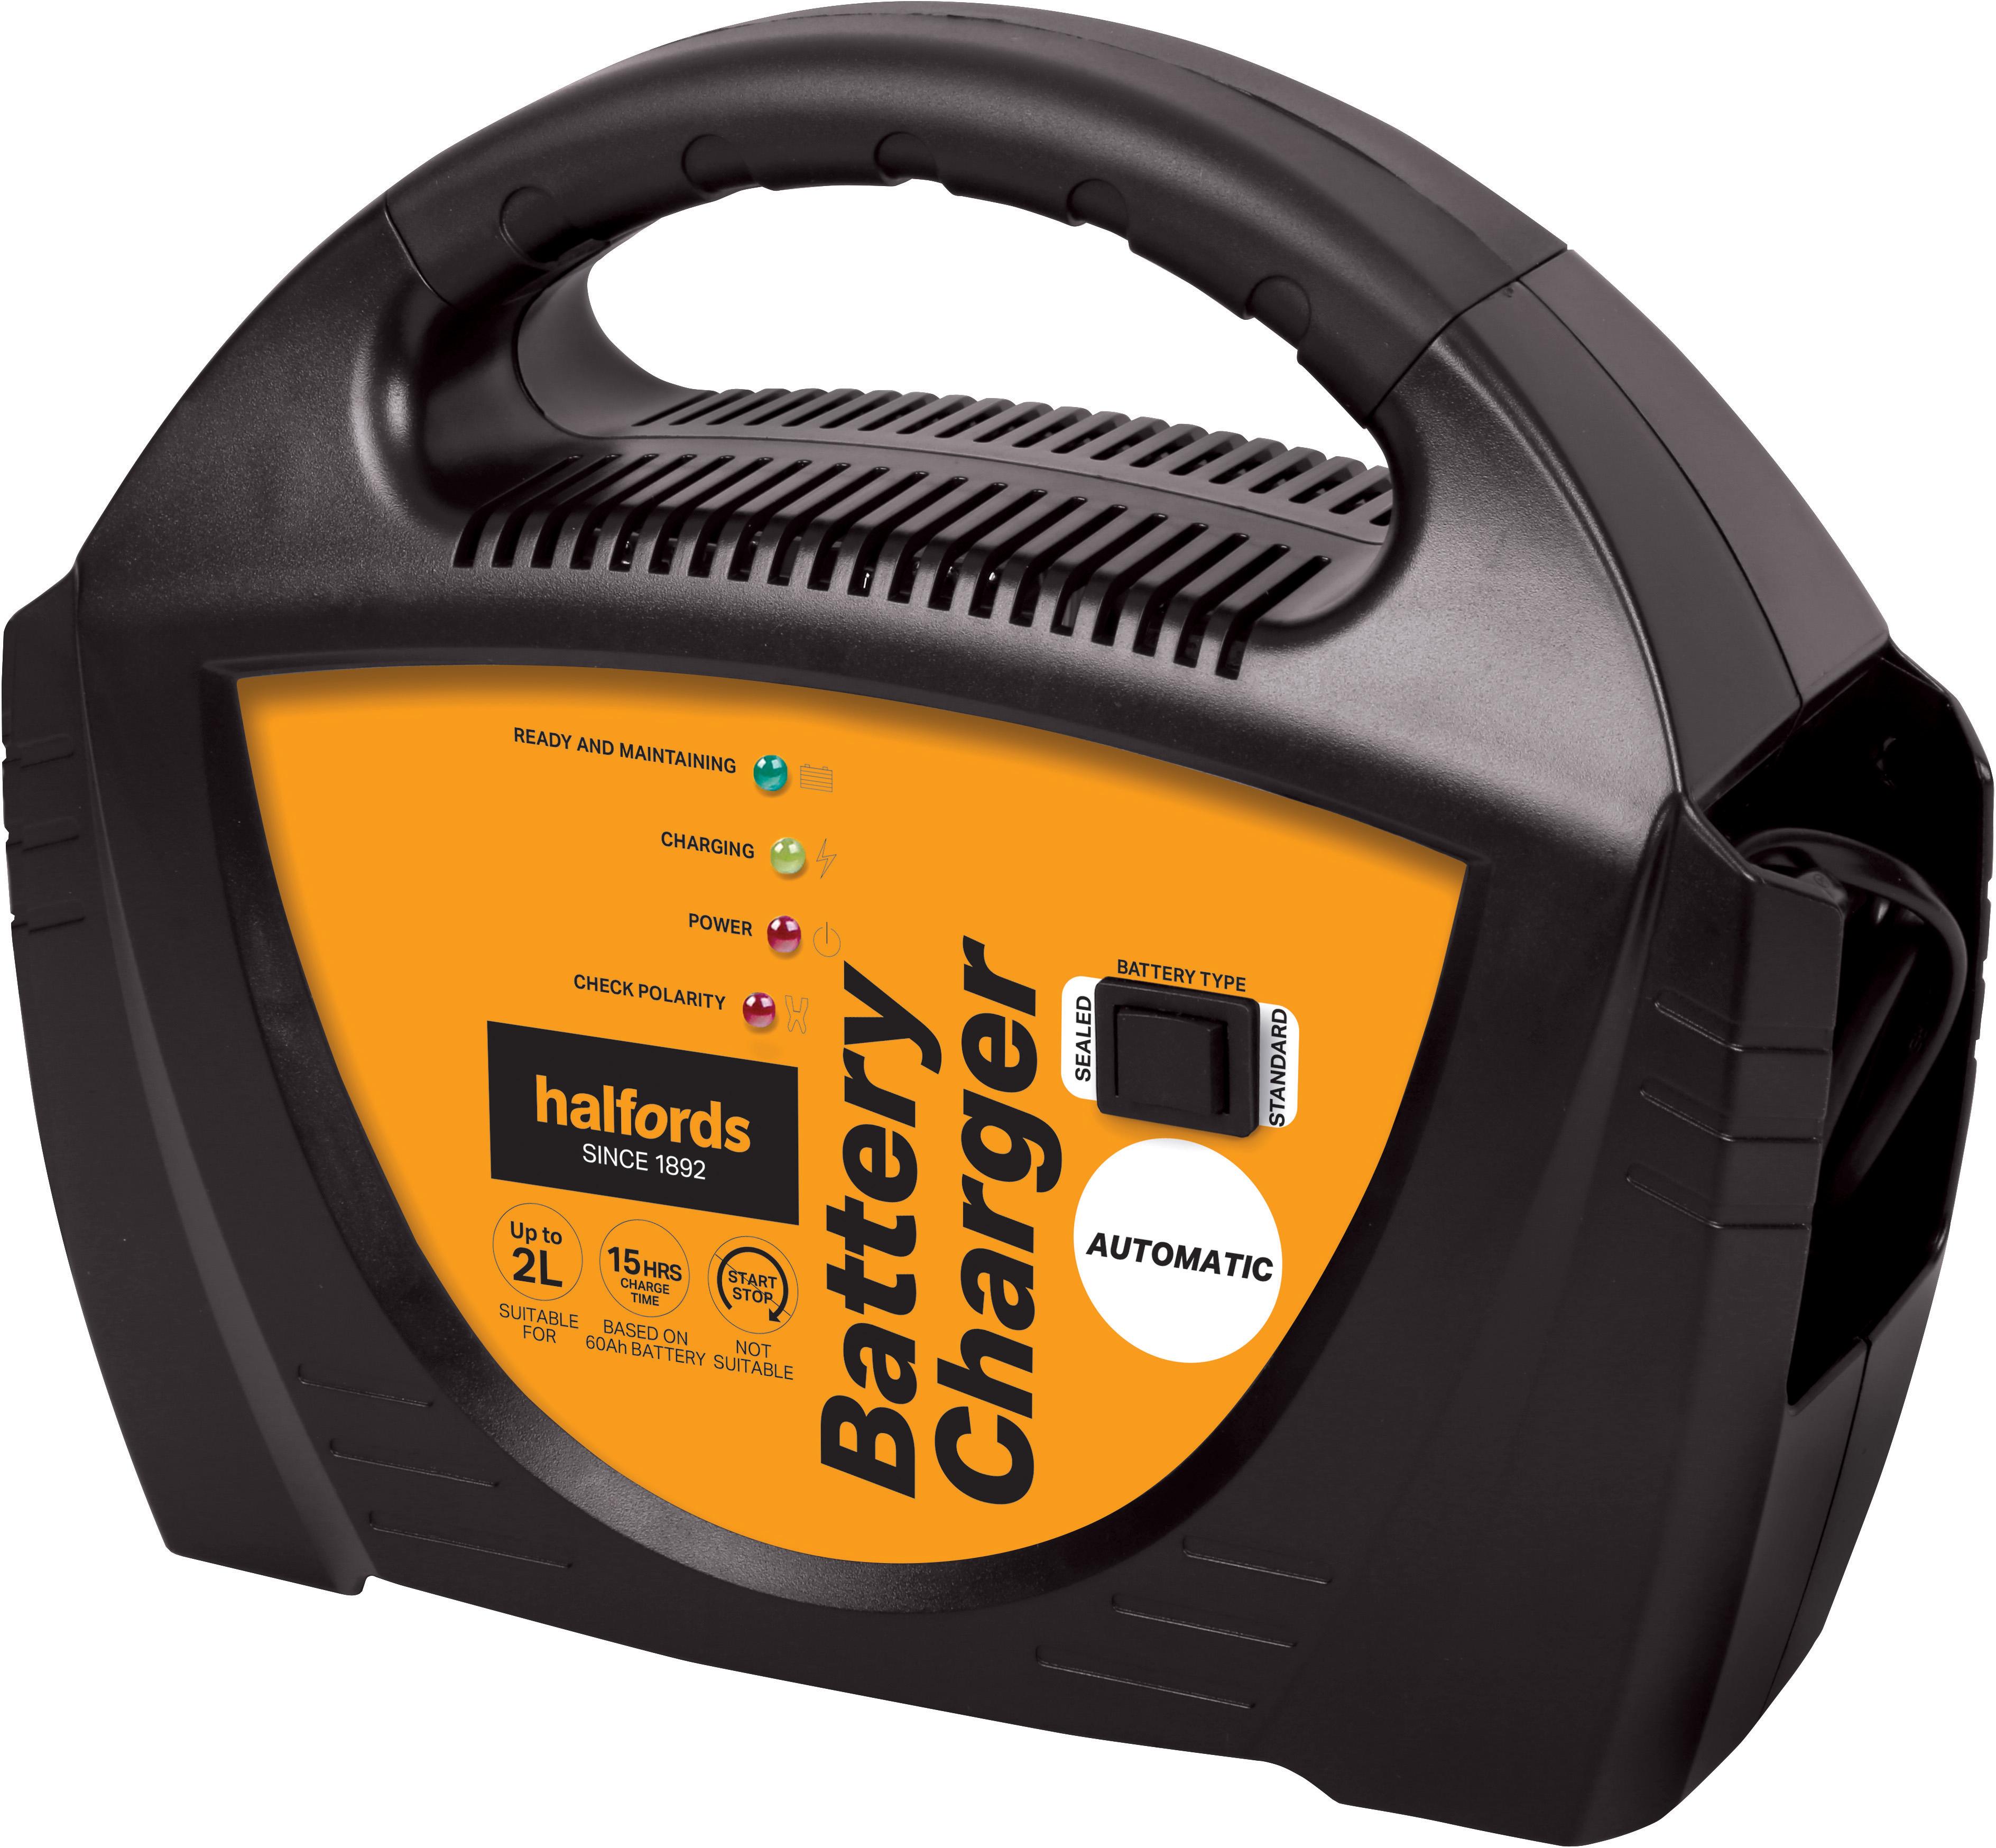 Halfords Automatic Battery Charger - Up To 2.0L